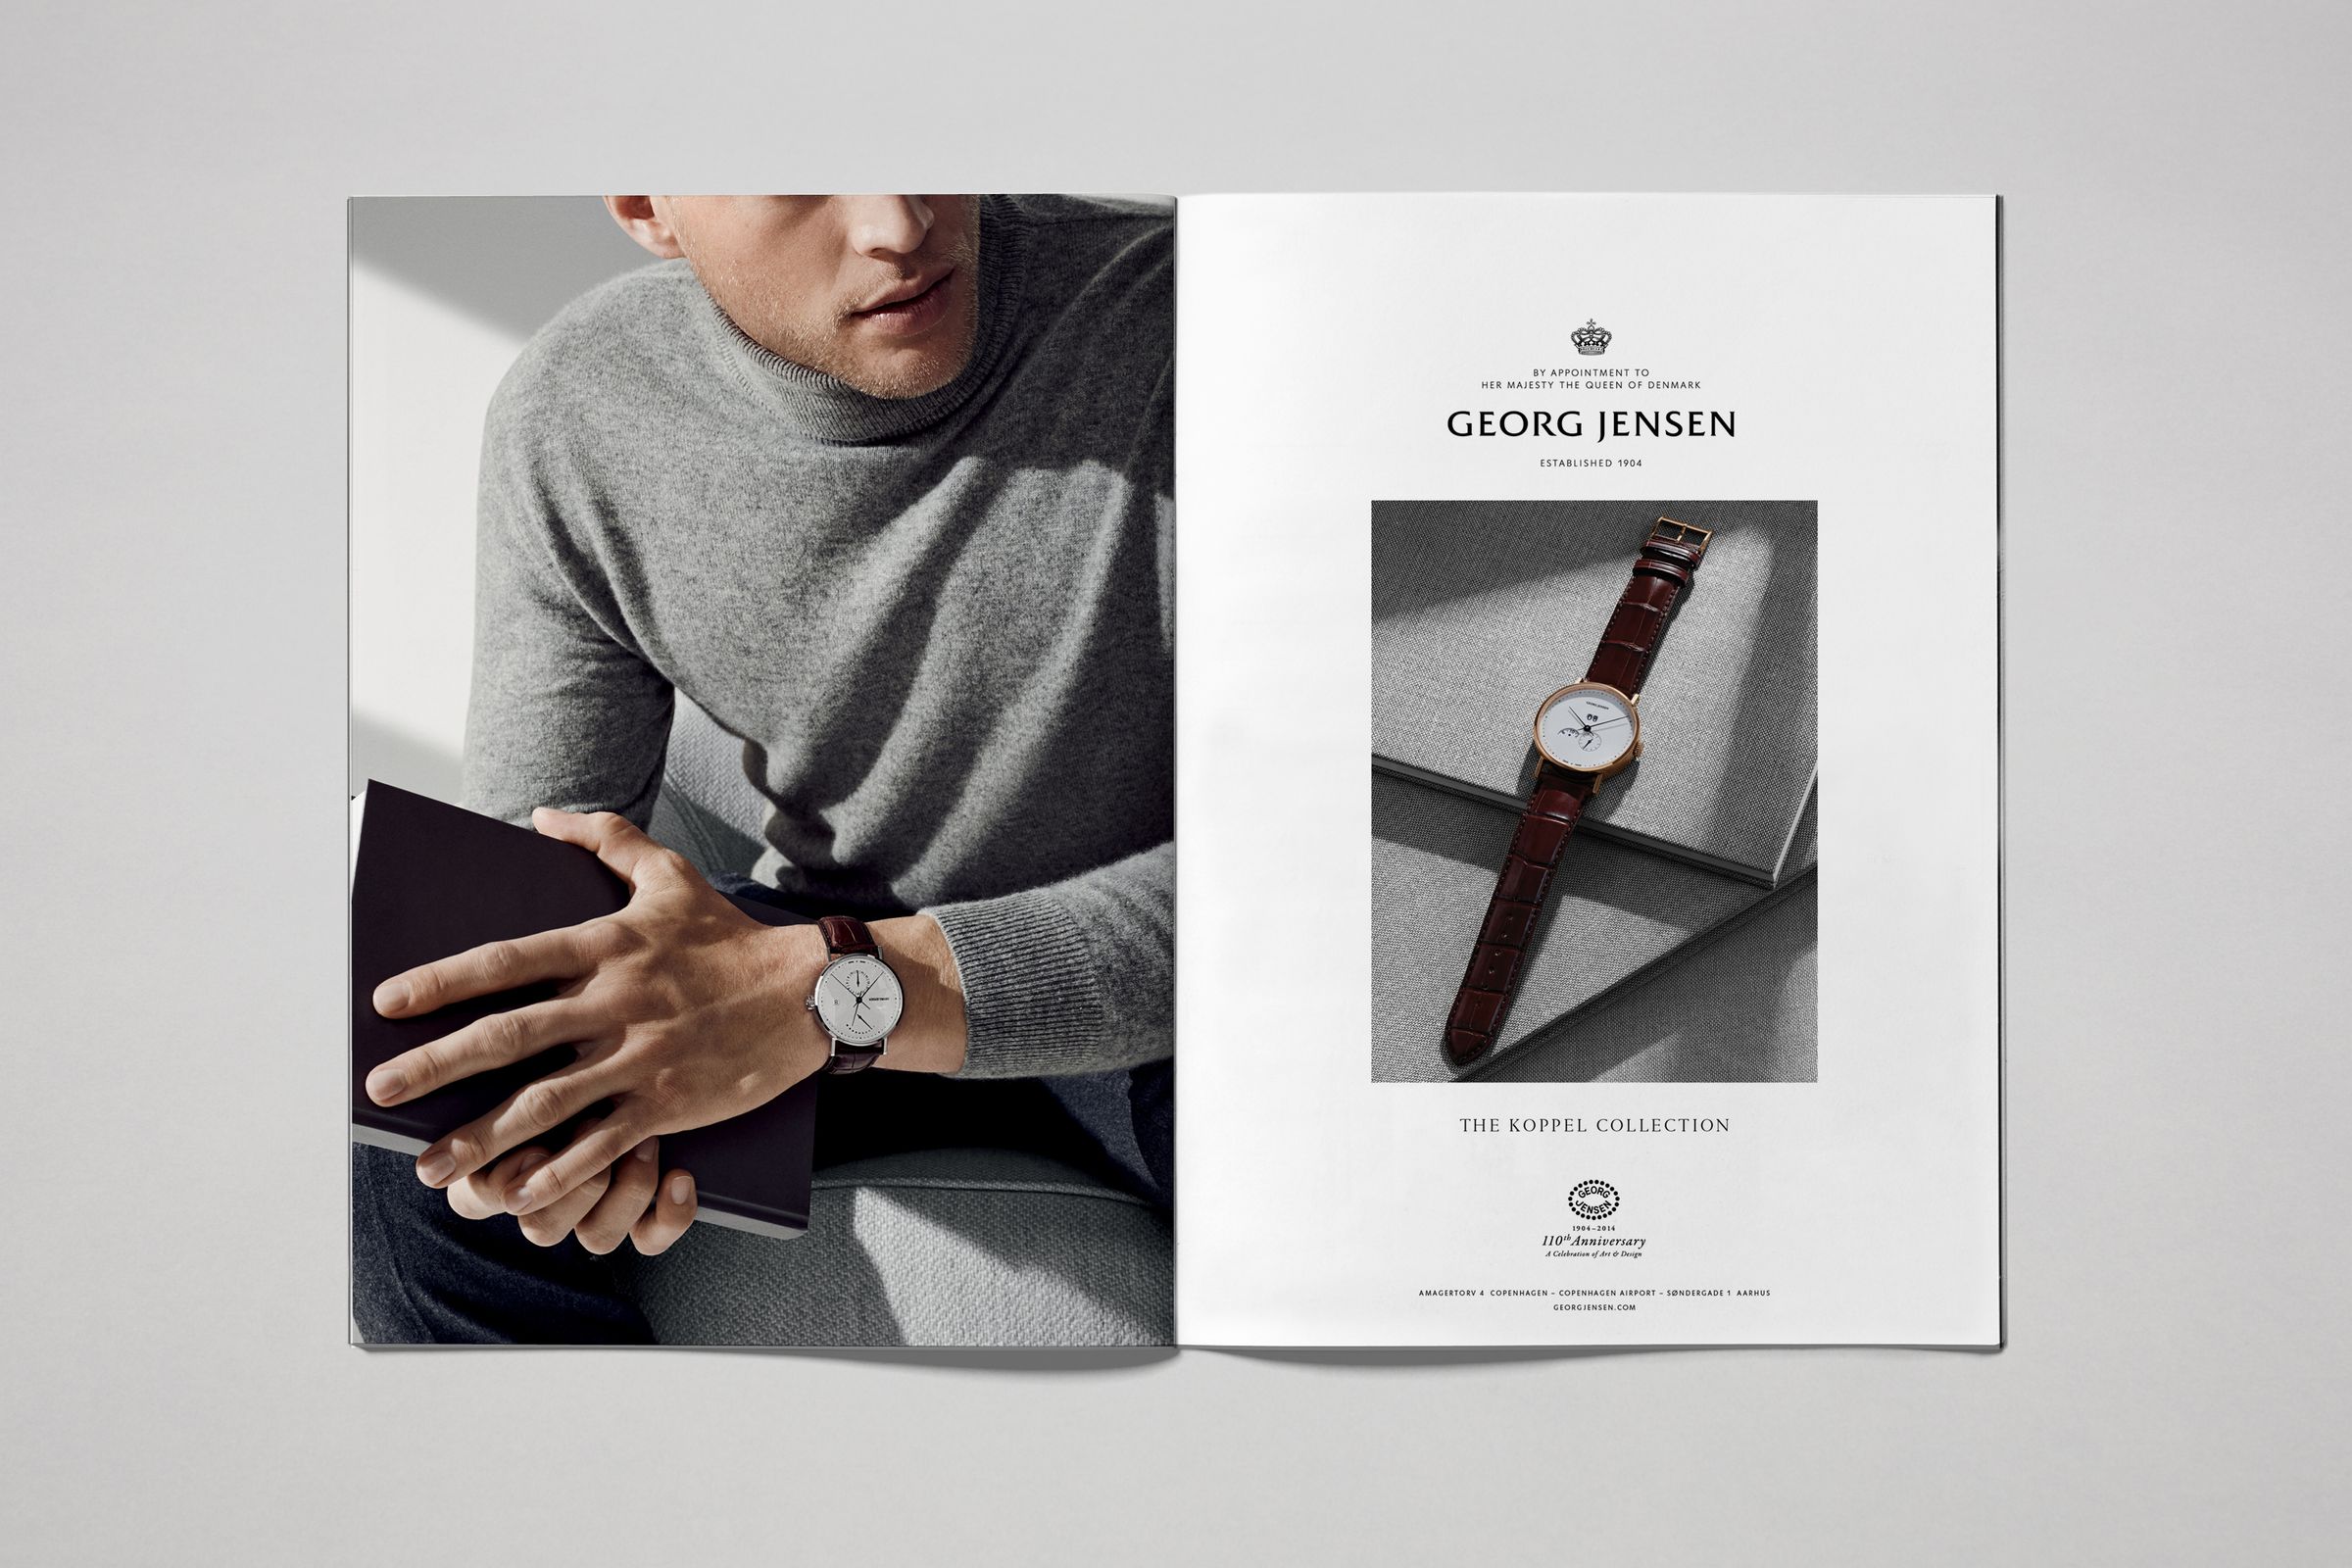 Georg Jensen men's watches campaign photographed by Hasse Nielsen and Toby McFarlan Pond